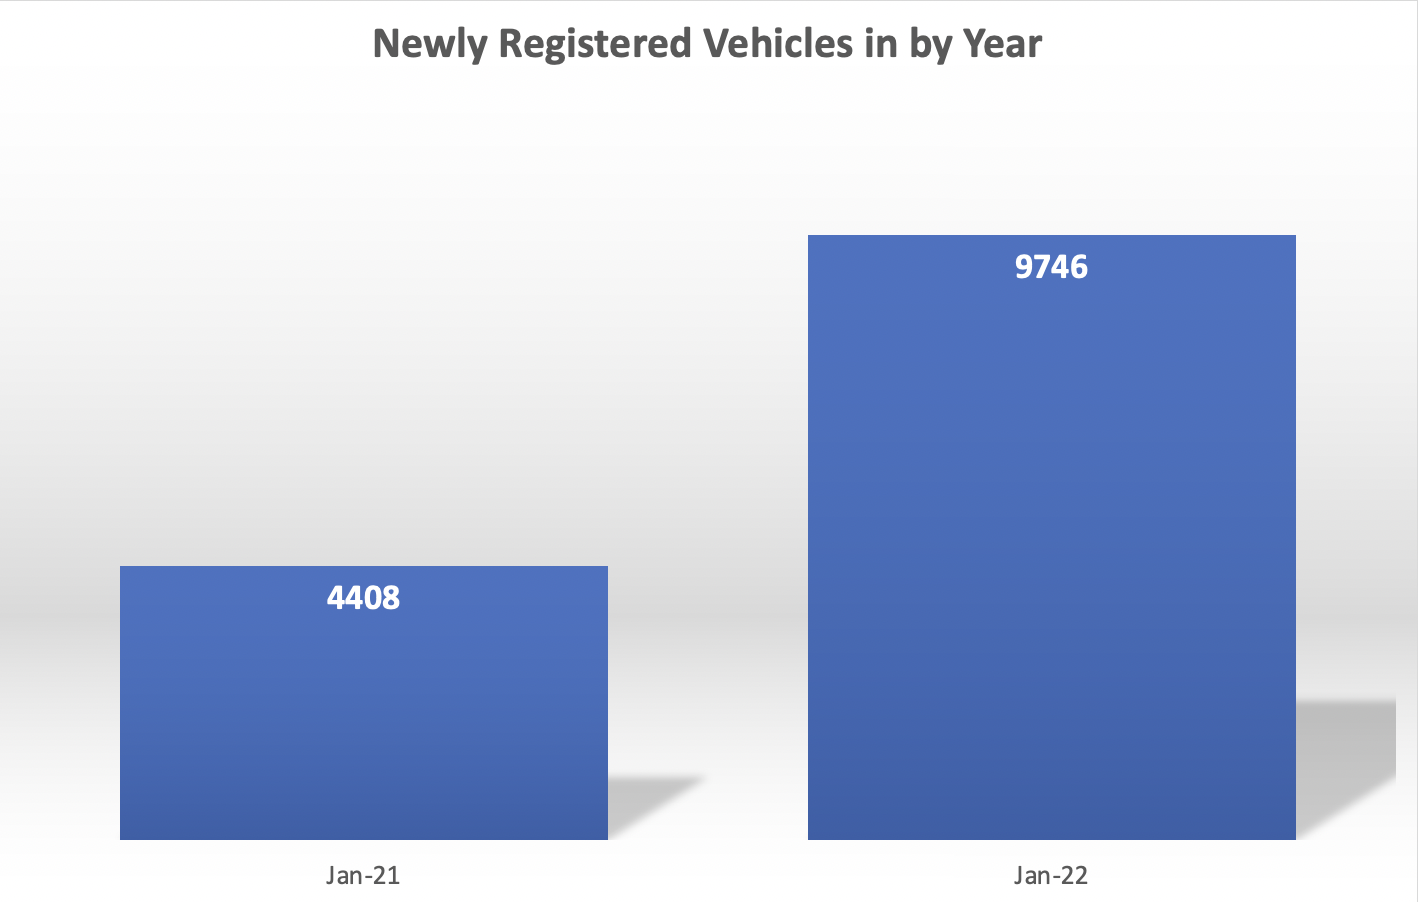 Newly Registered EVs by Year in CT 2020 vs 2021